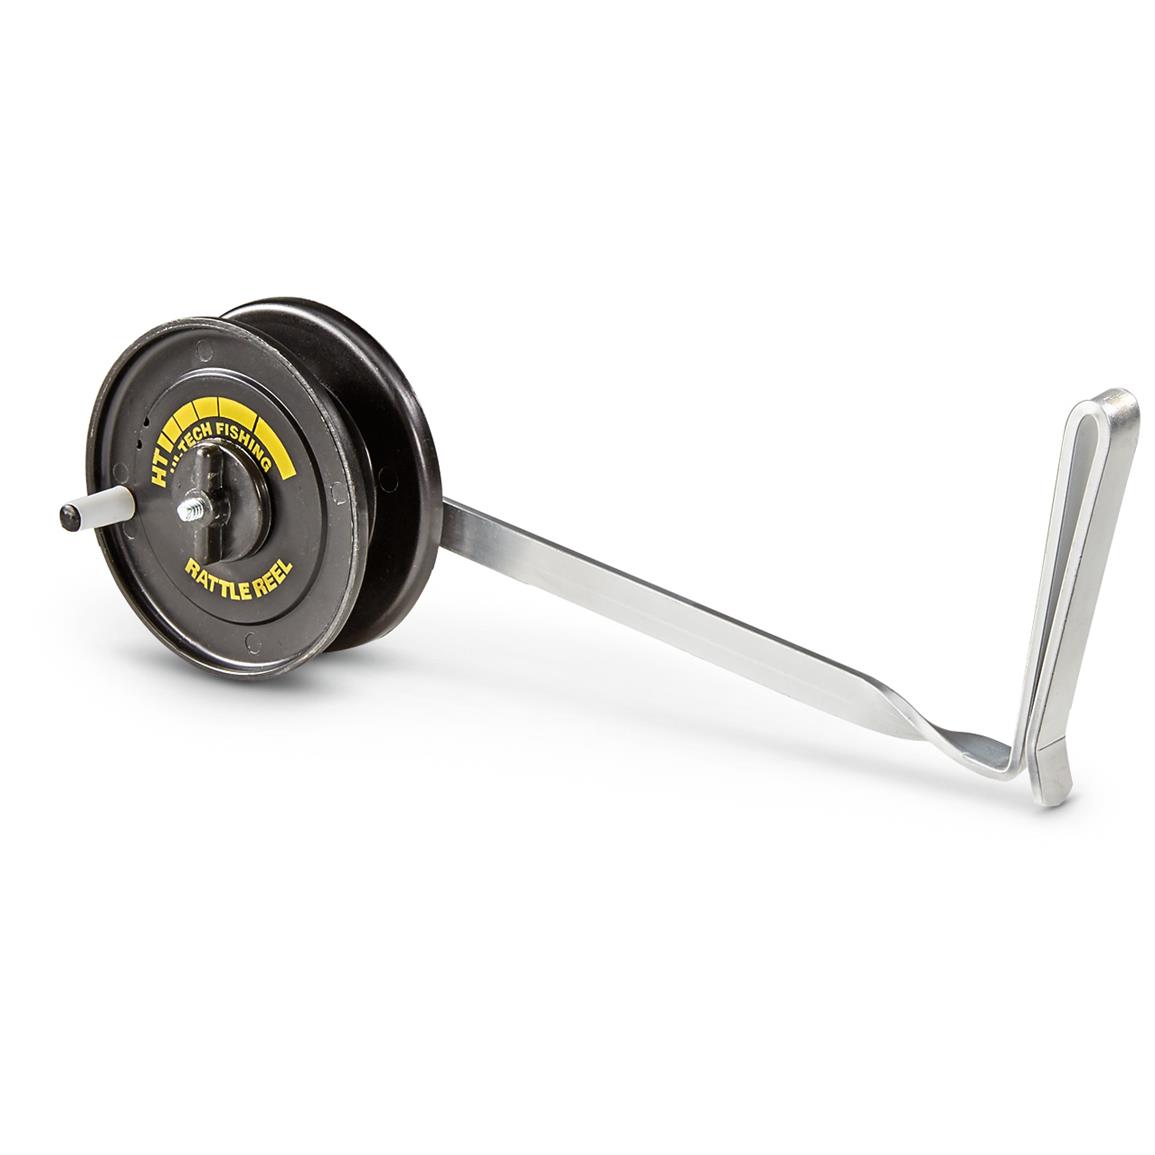 Deluxe Rattle Reel with Aluminum Arm